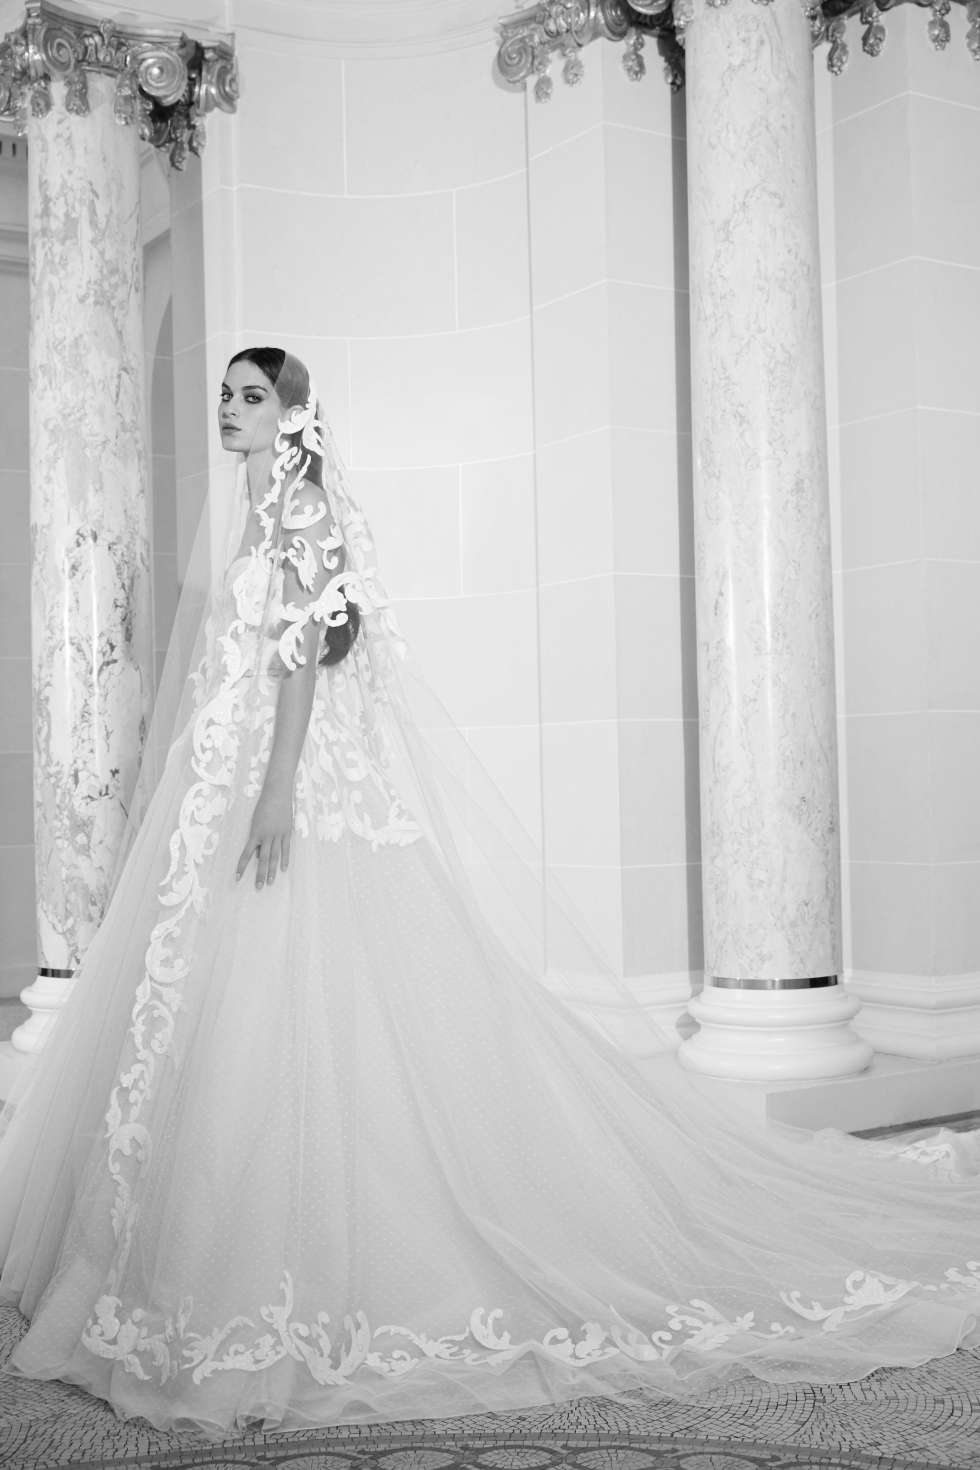 The Fall 2019 Wedding Dress Collection by Elie Saab